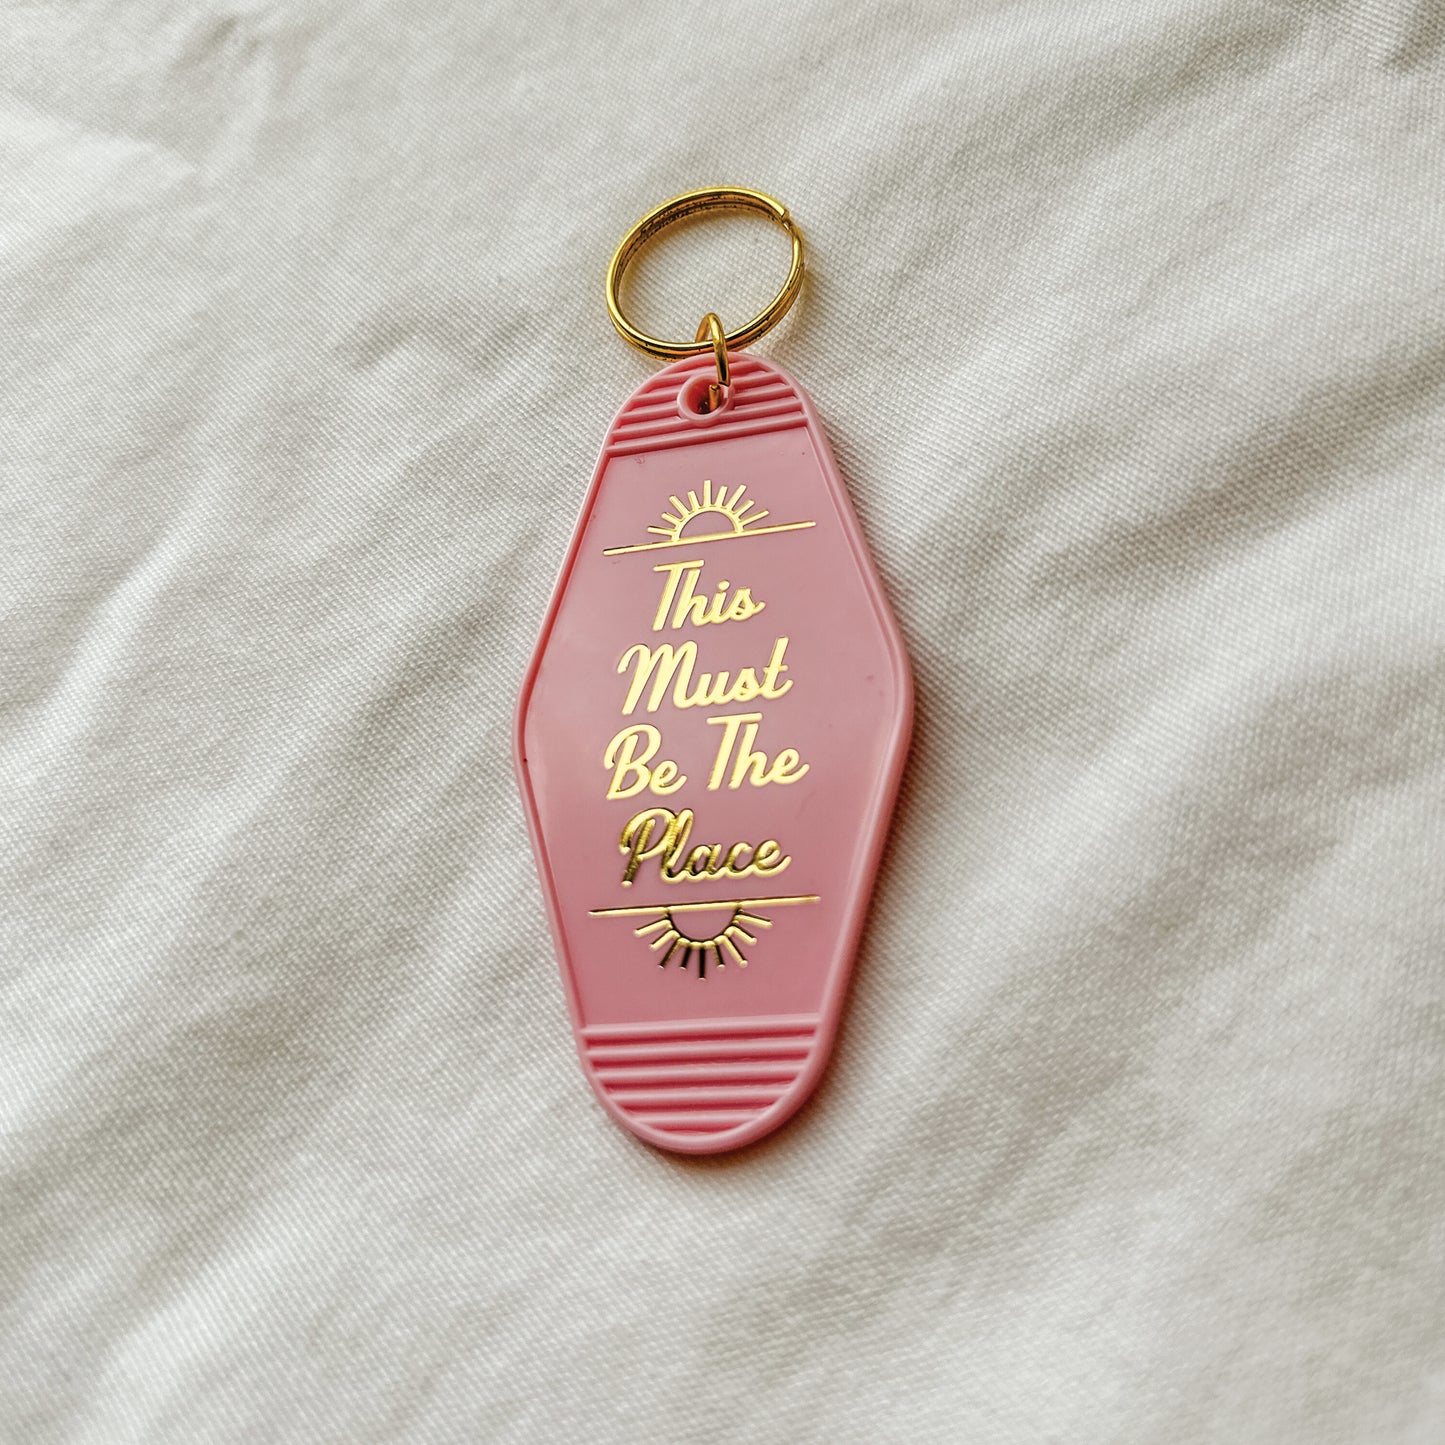 This Must Be The Place Hotel Keychain